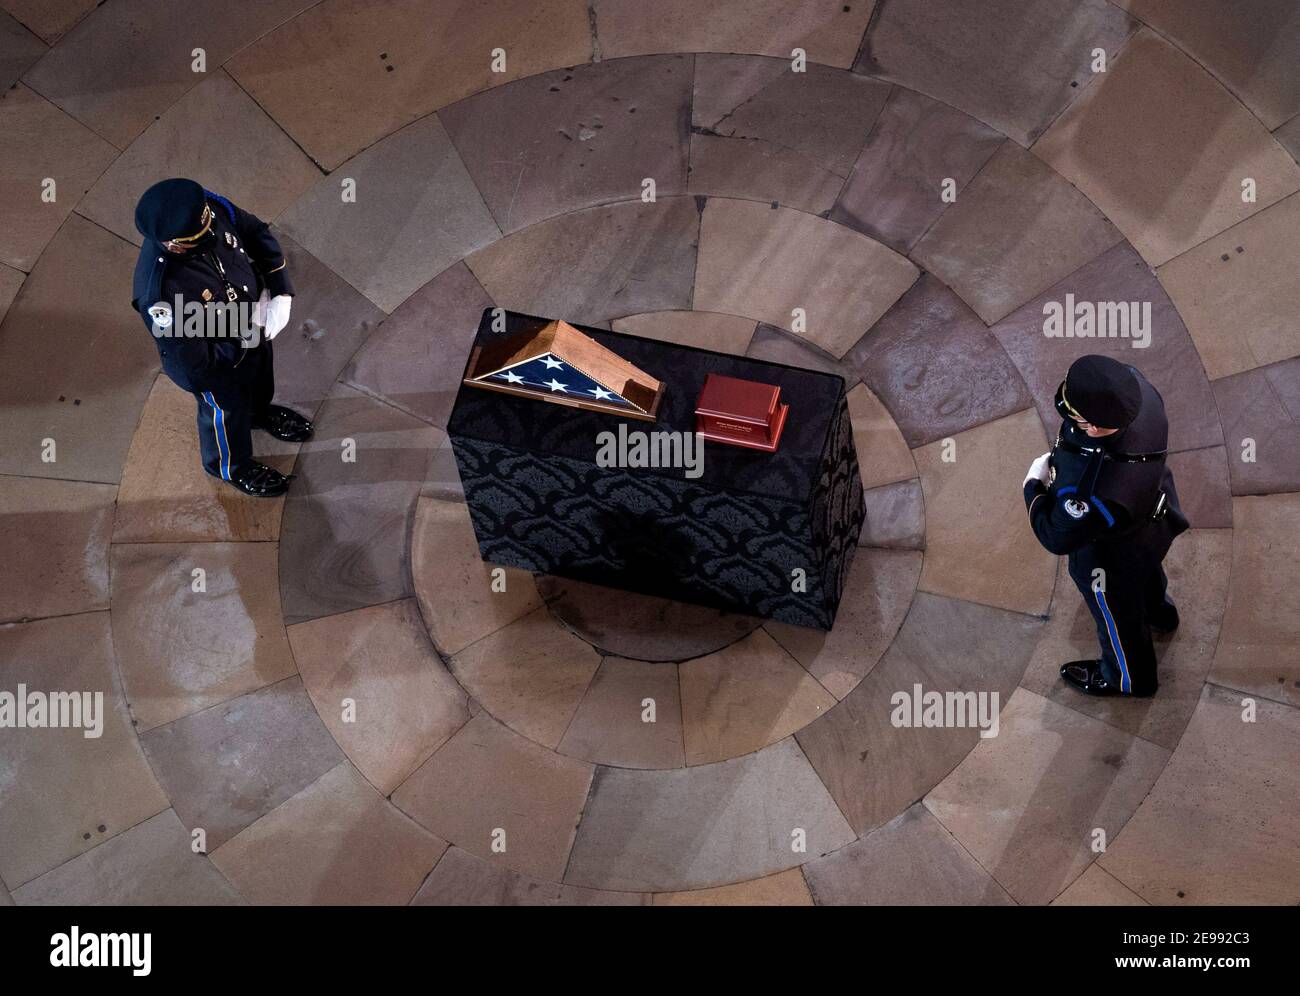 Capitol Hill Police Officer Brian Sicknick lies in honor in the Rotunda of the U.S. Capitol Building in Washington, DC on Tuesday, February 3, 2021. Sicknick died from injures sustained during the January 6 riot at the U.S. Capitol. Photo by Kevin Dietsch/Pool/ABACAPRESS.COM Stock Photo